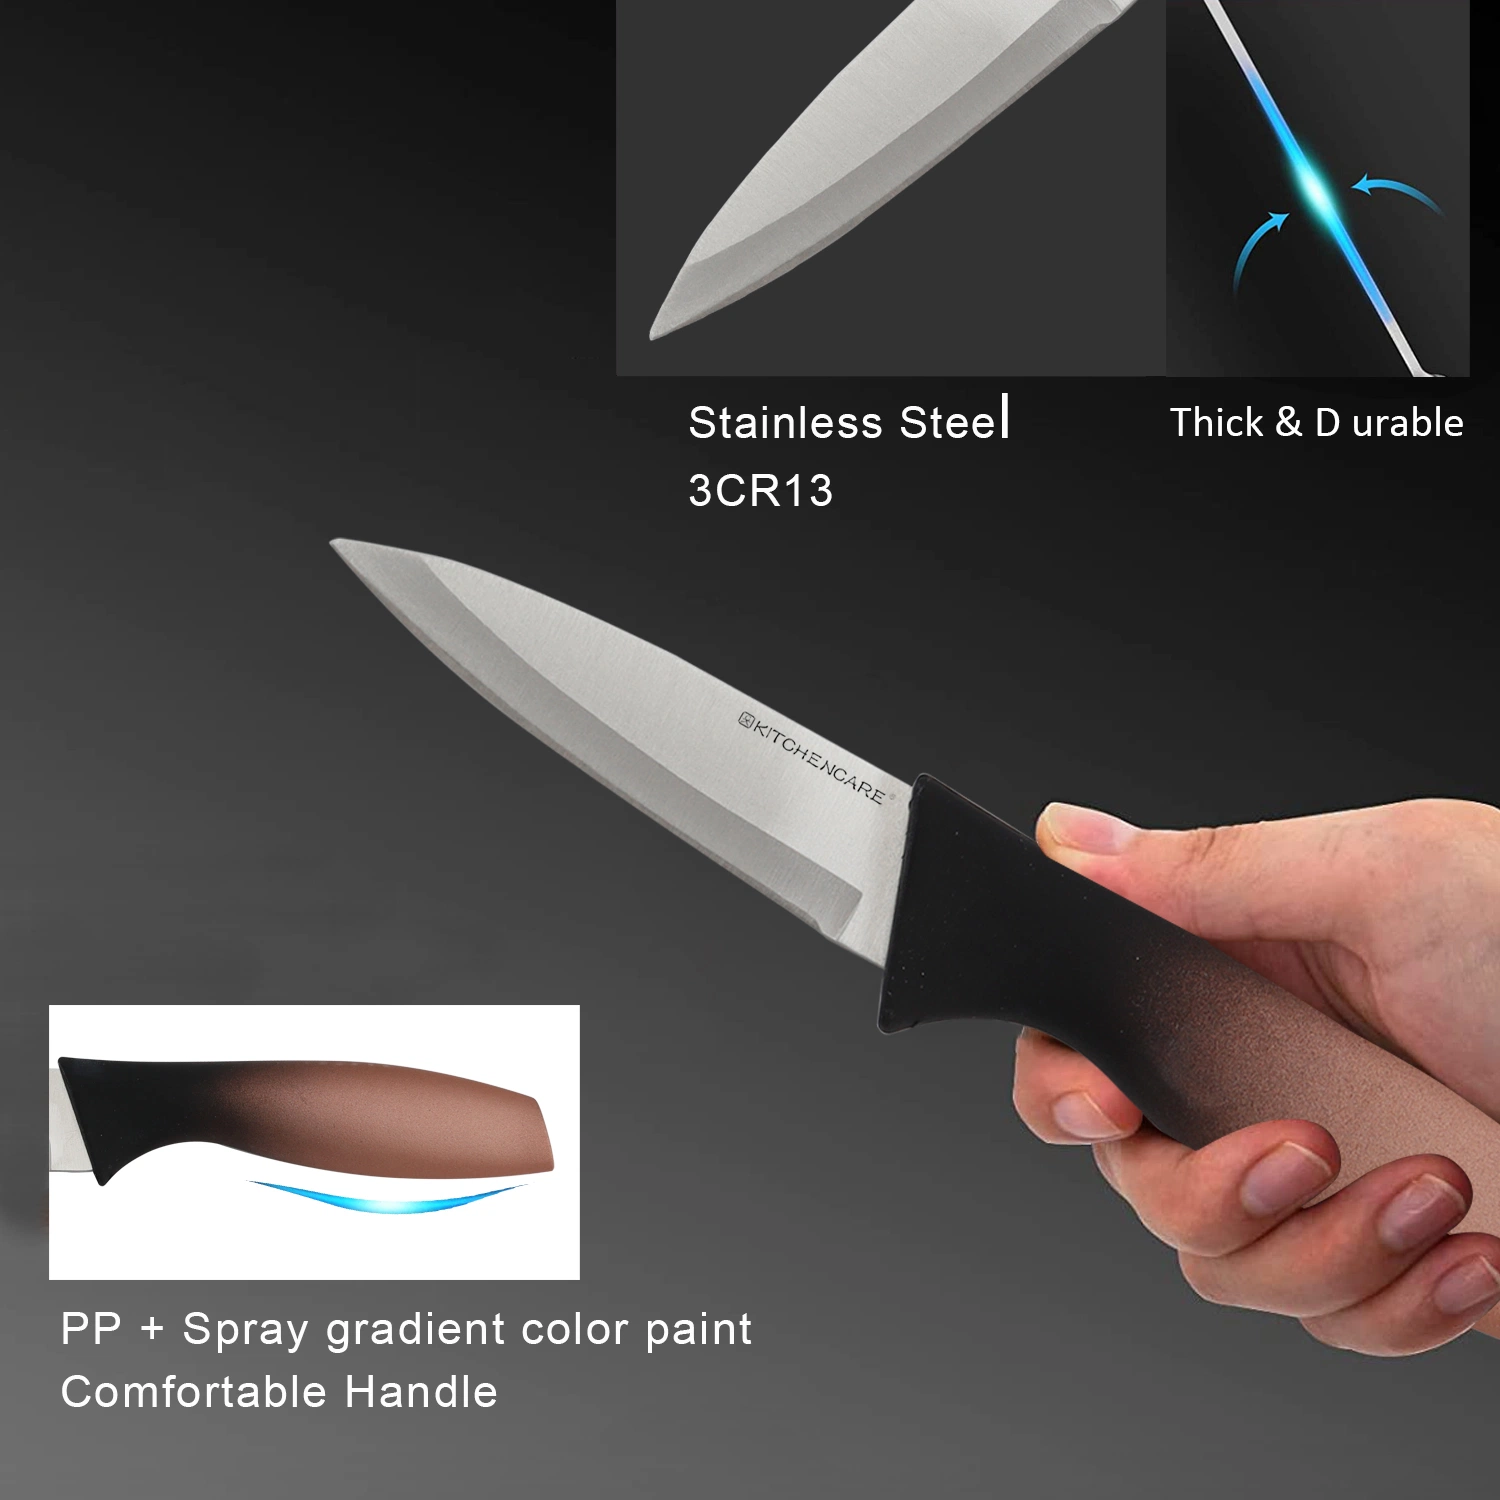 Hip-Home Hot Selling Stainless Steel Fruit Knives Wholesale/Supplier 3.5"Paring Knife